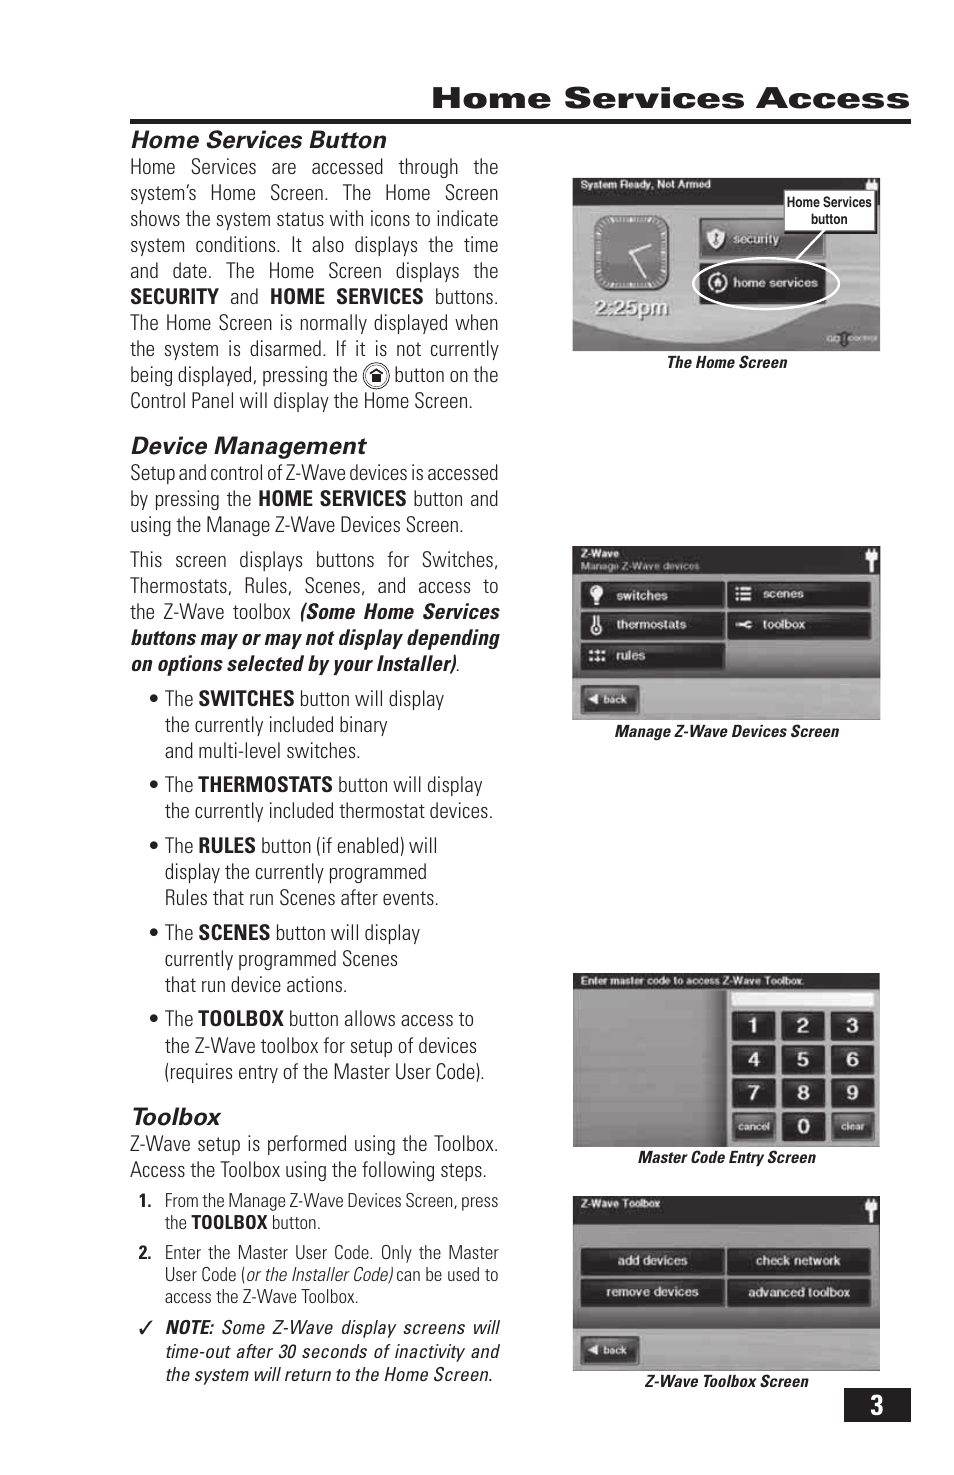 3home services access, Home services button, Device management | Toolbox | 2GIG Z-Wave User Manual | Page 5 / 24